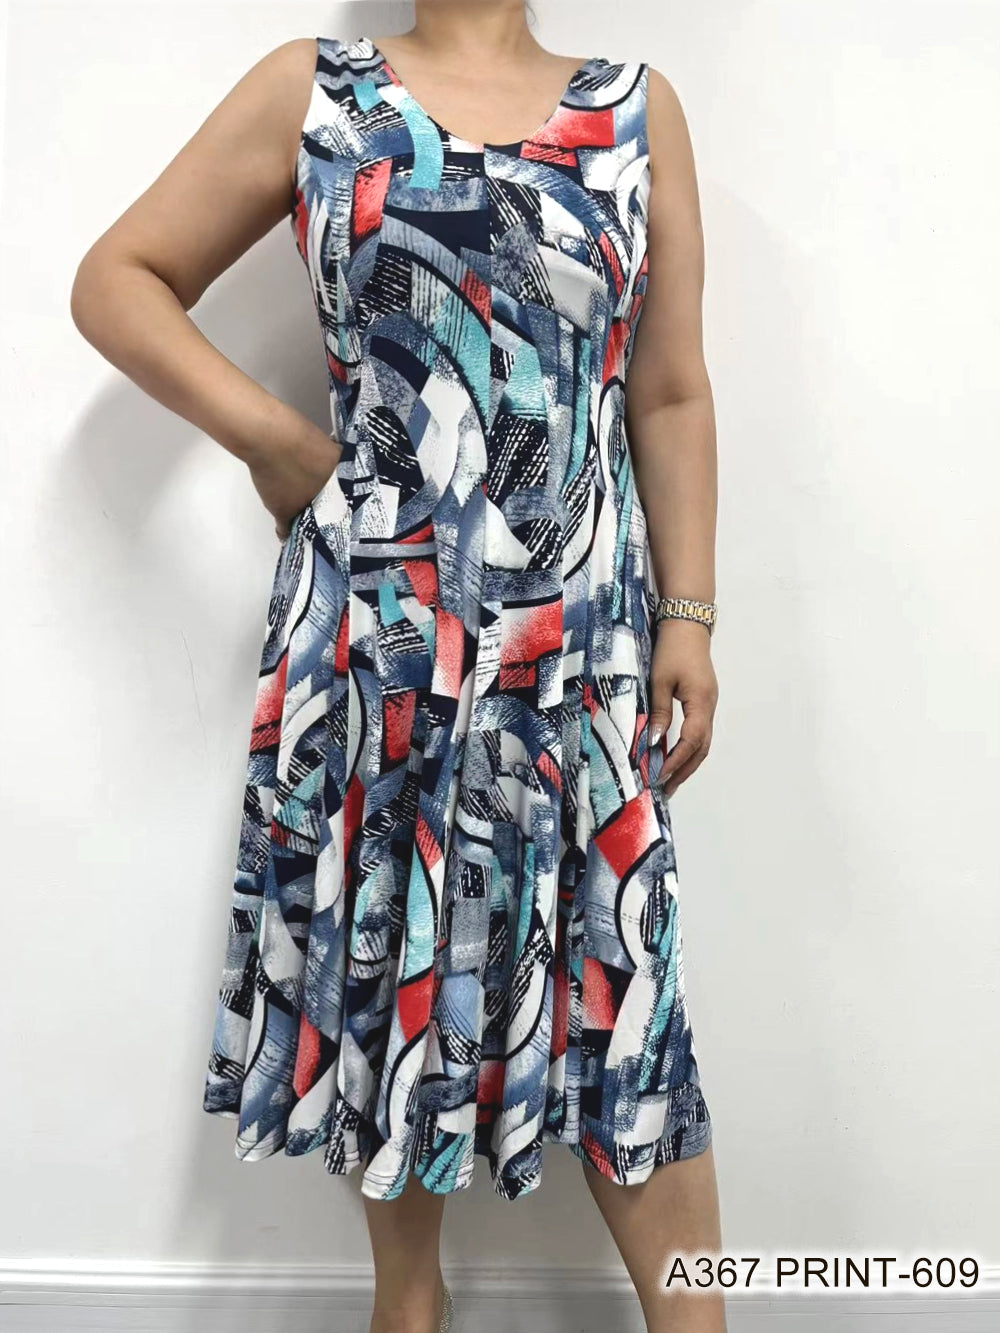 Creations & Periwinkle Panel Dress